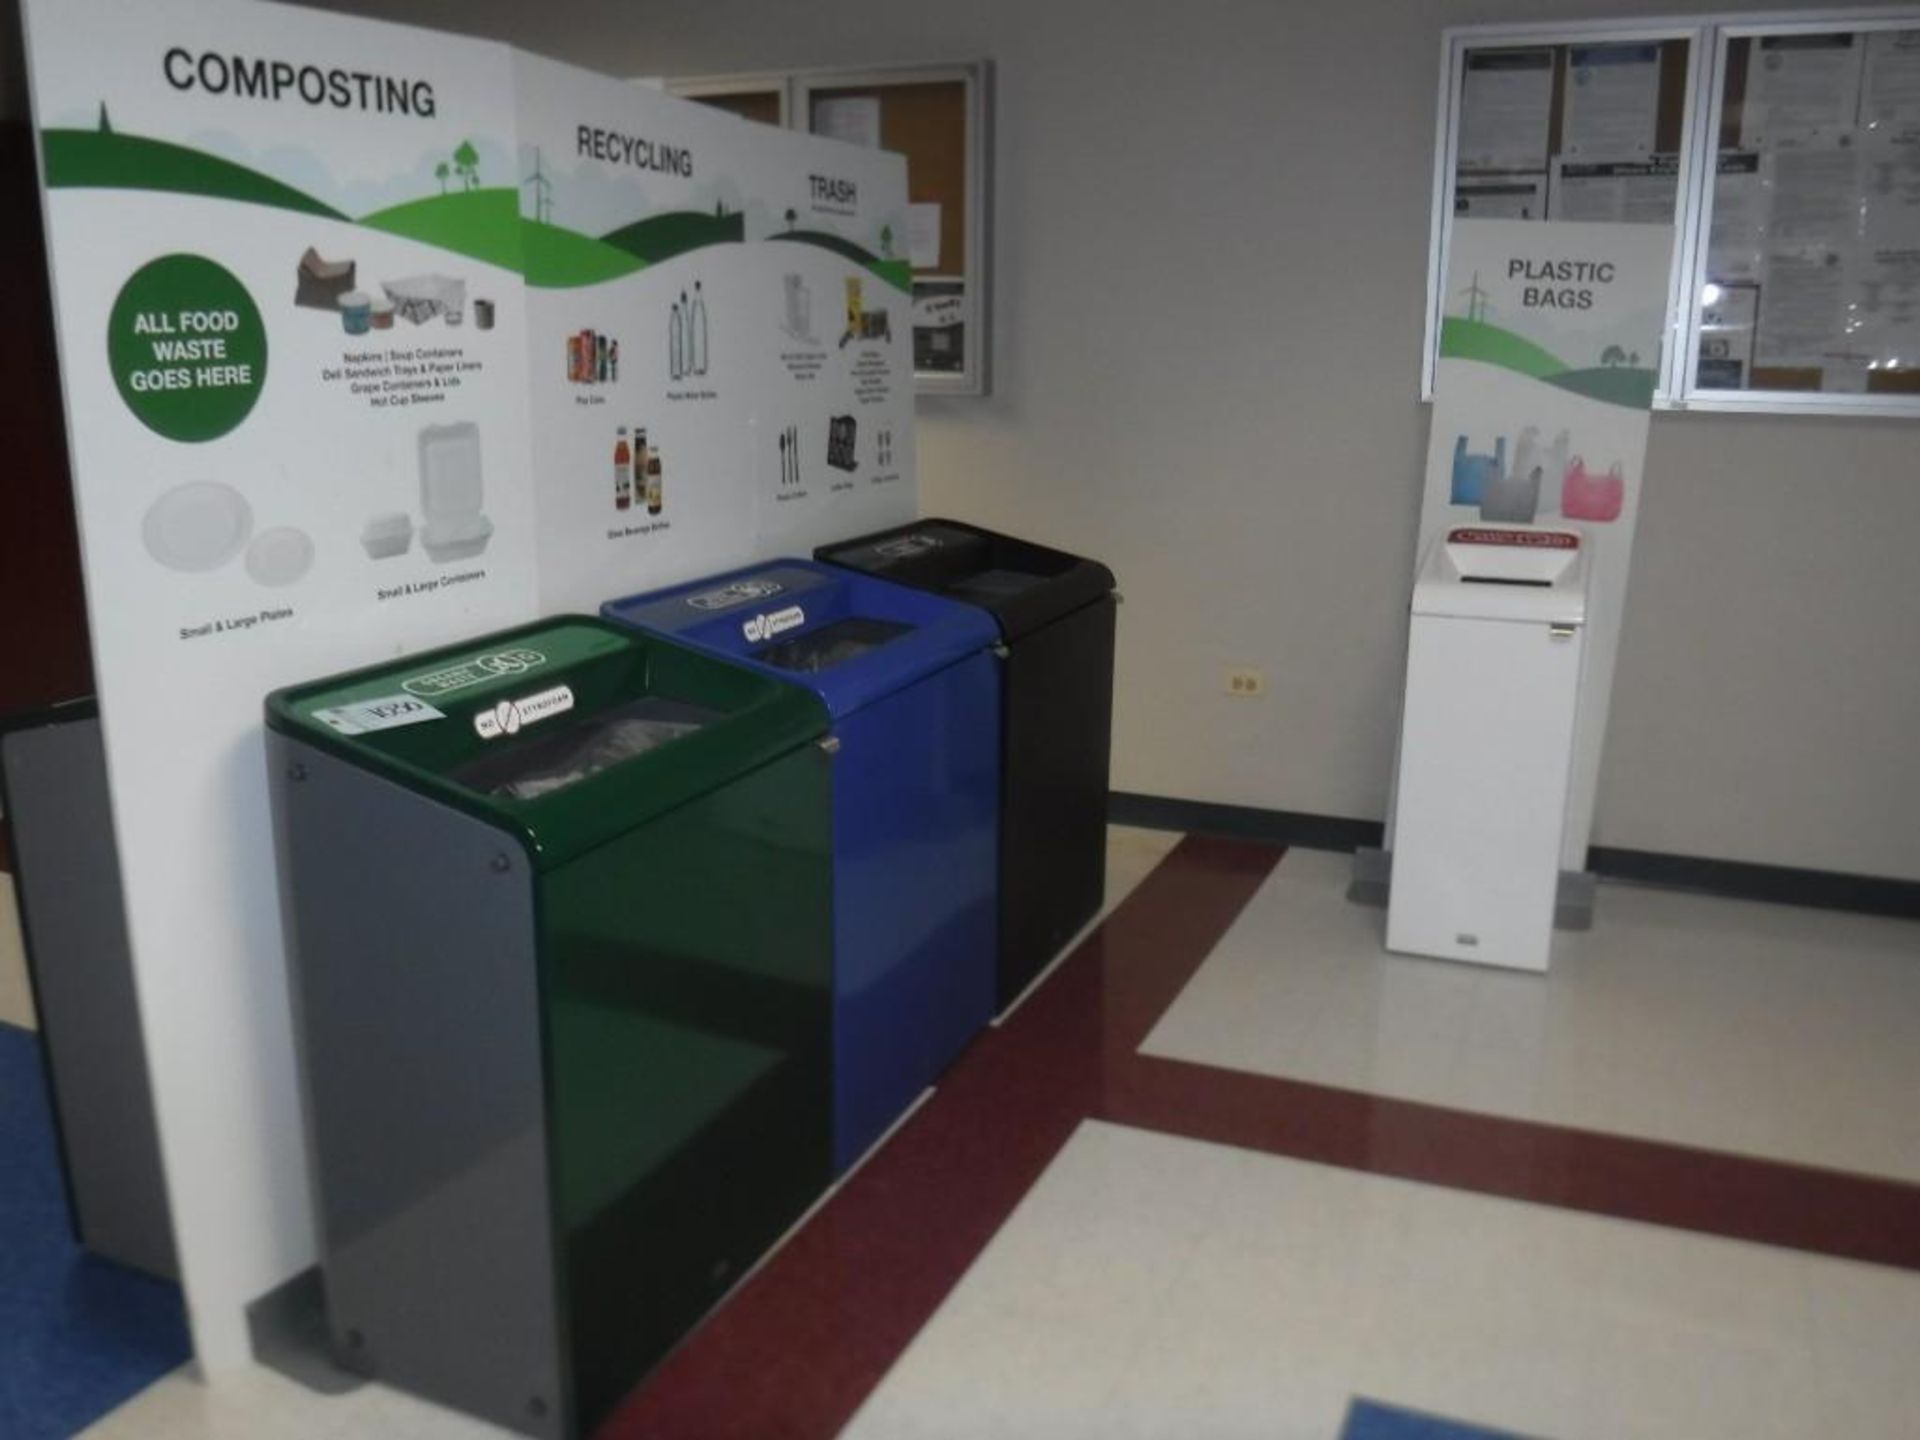 Lot c/o: All Recycle Bins (Station) - Image 2 of 2